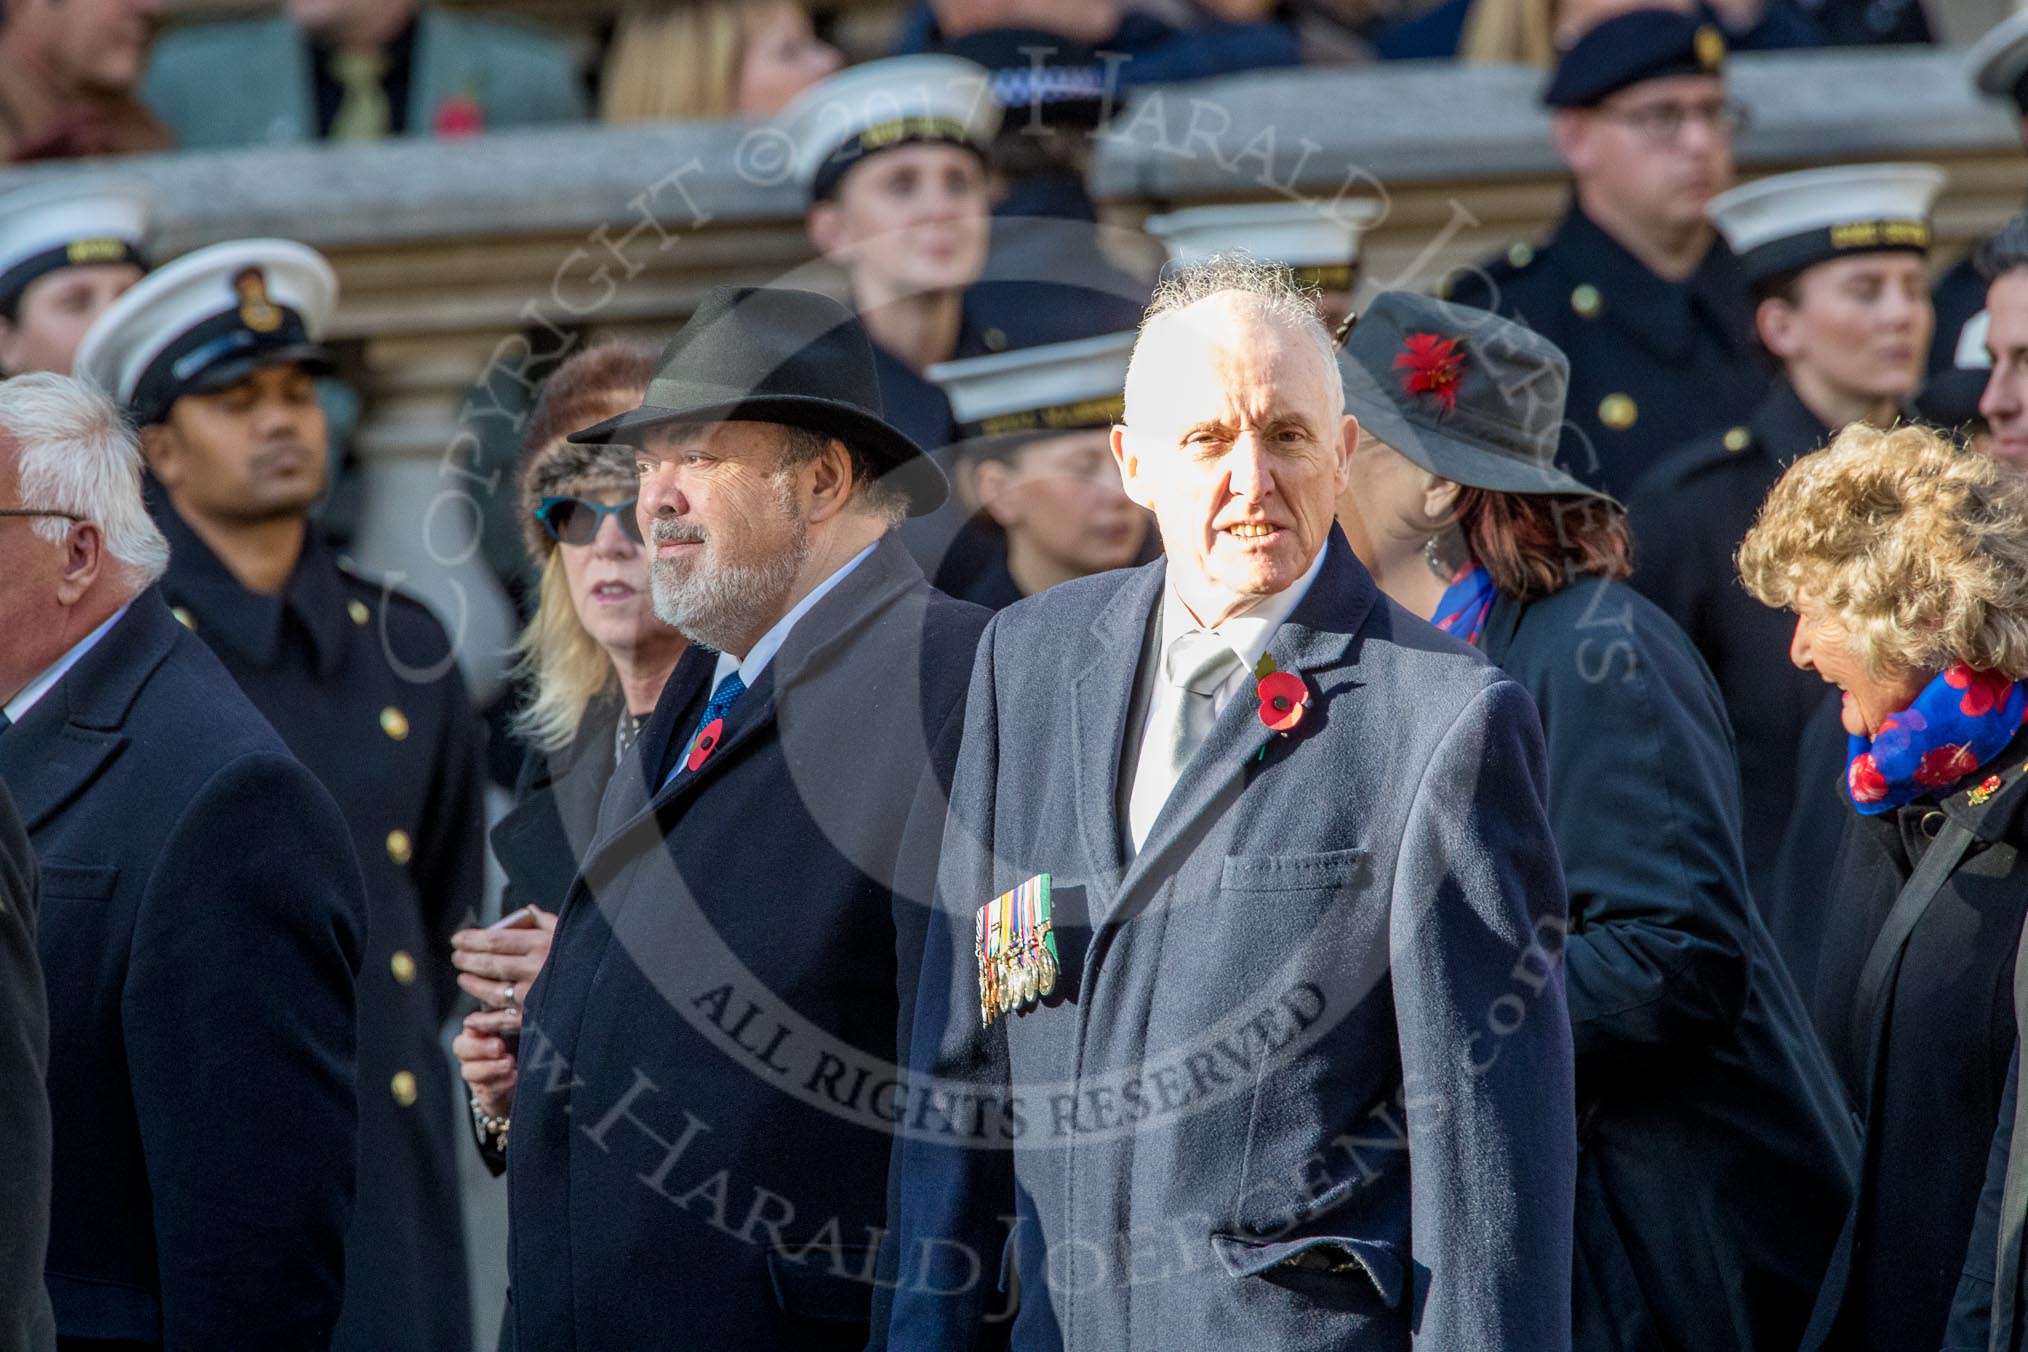 National Association of Round Tables (Group M30, 24 members) during the Royal British Legion March Past on Remembrance Sunday at the Cenotaph, Whitehall, Westminster, London, 11 November 2018, 12:28.